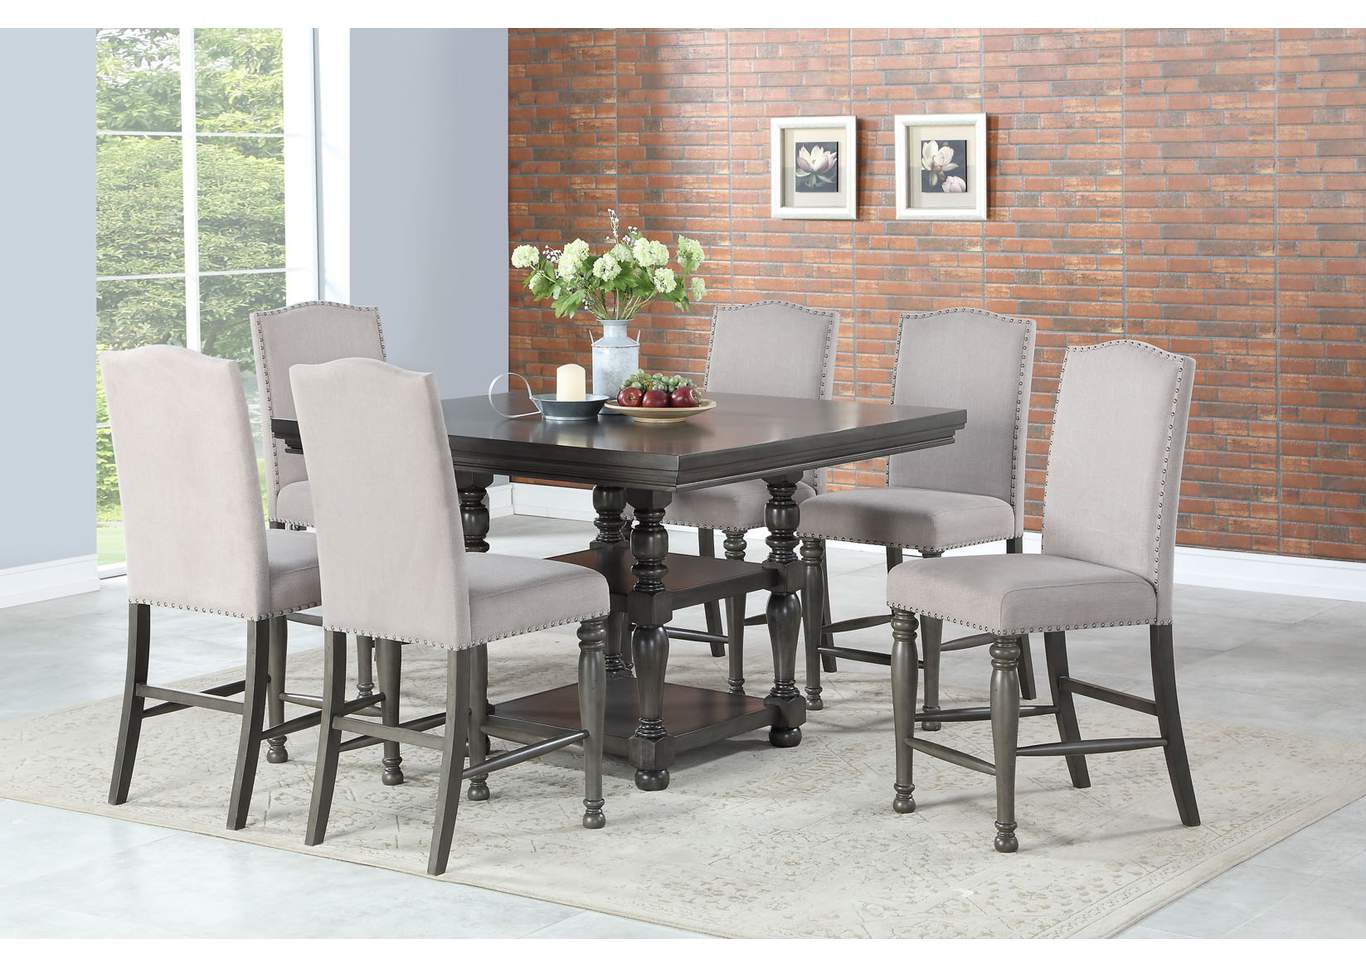 Caswell Grey Counter Dining Set W/ 6 Chairs,Steve Silver